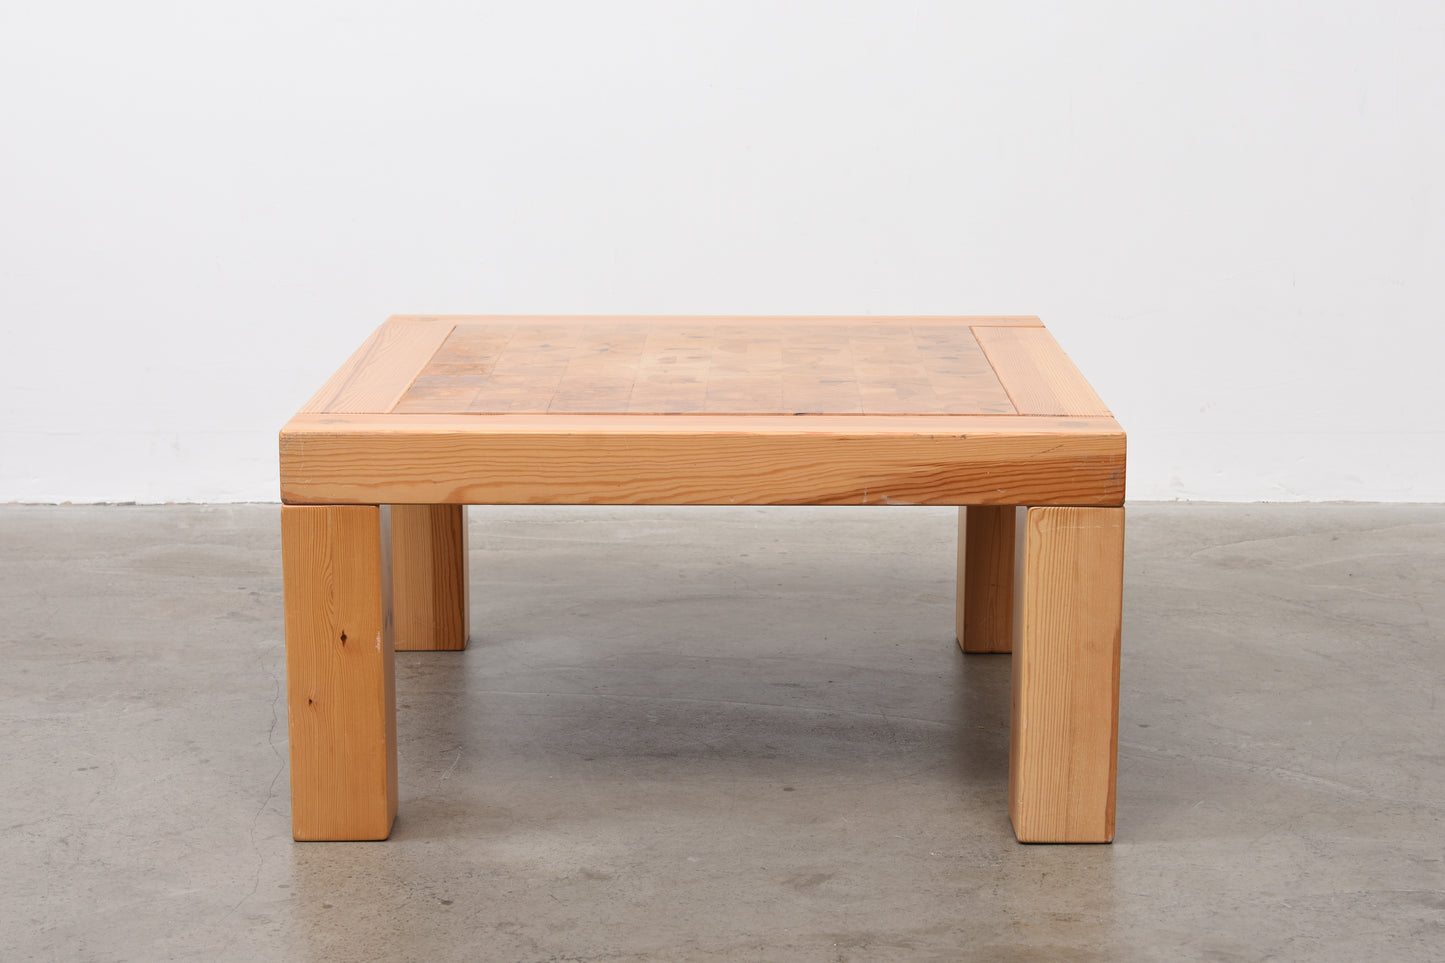 1970s pine coffee table by Christer Lundén